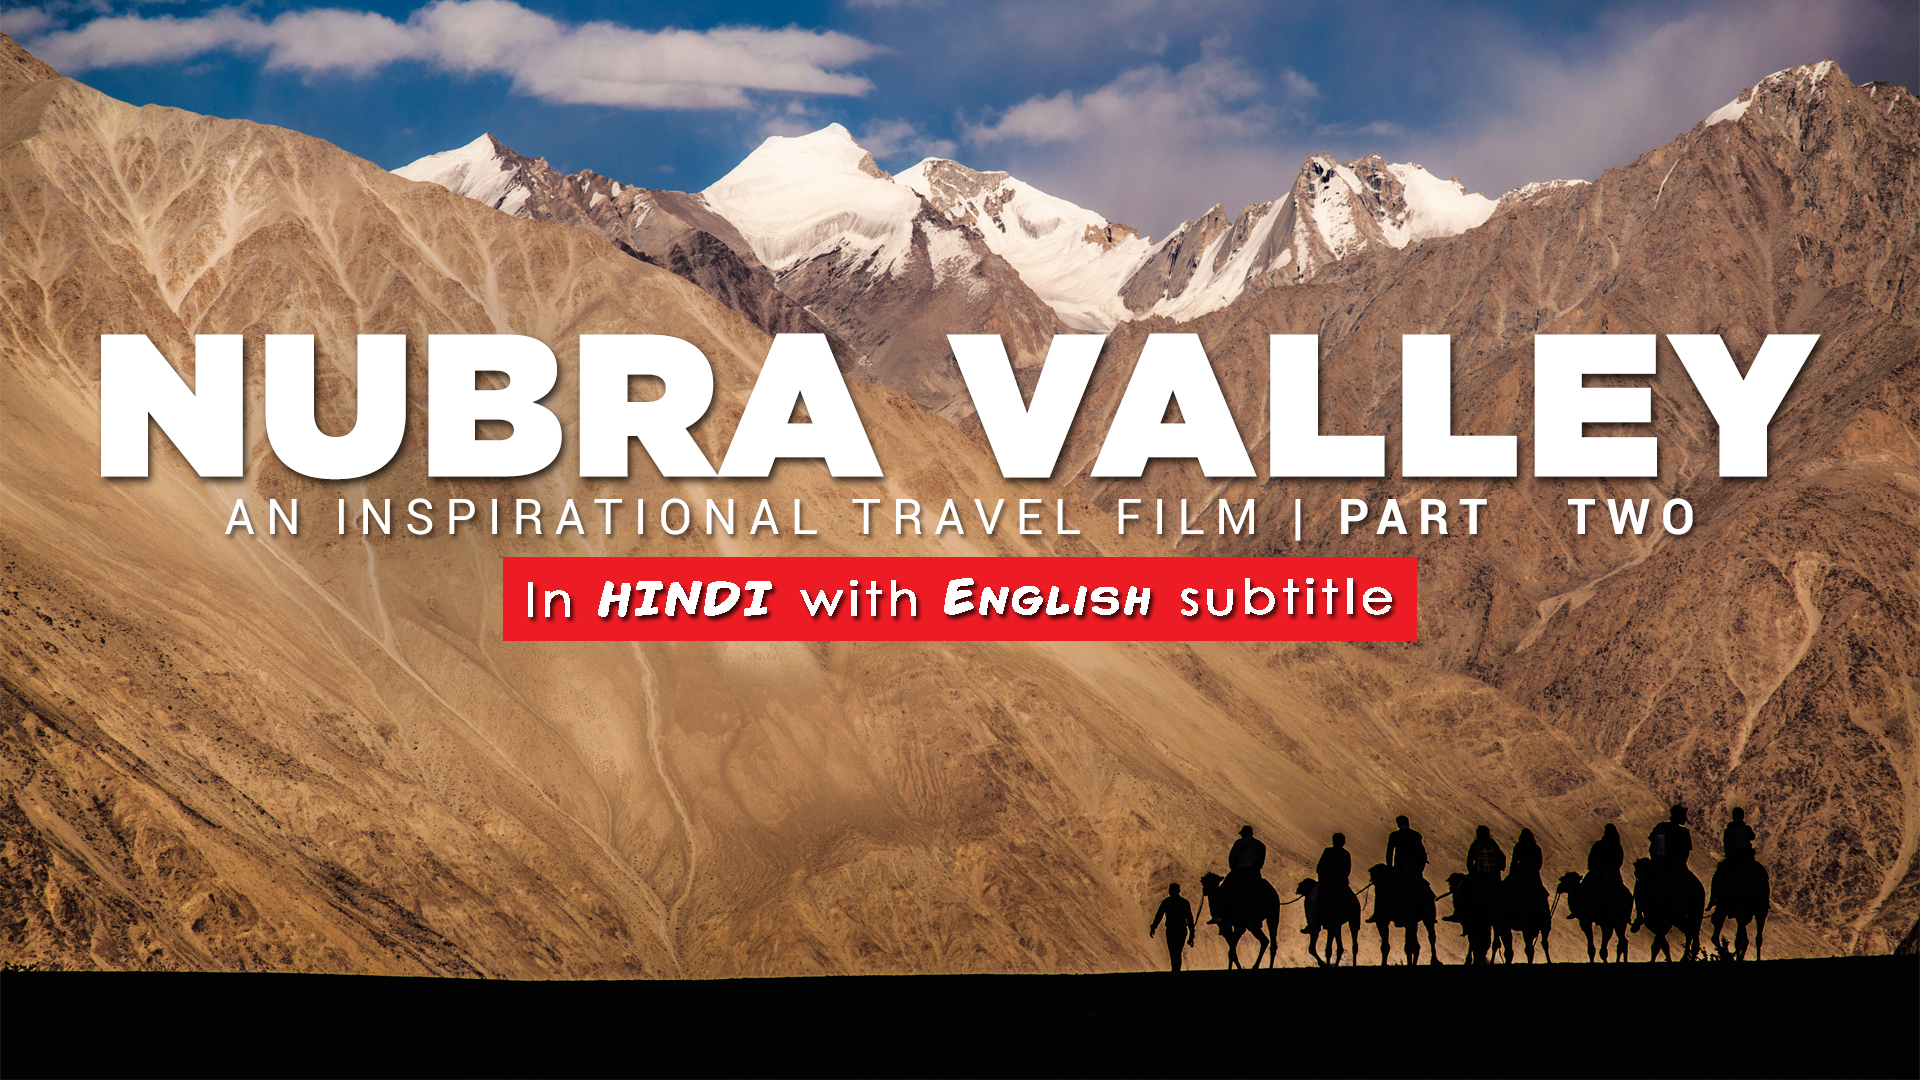 Nubra Valley Travel Guide  Places to Visit in Nubra Valley